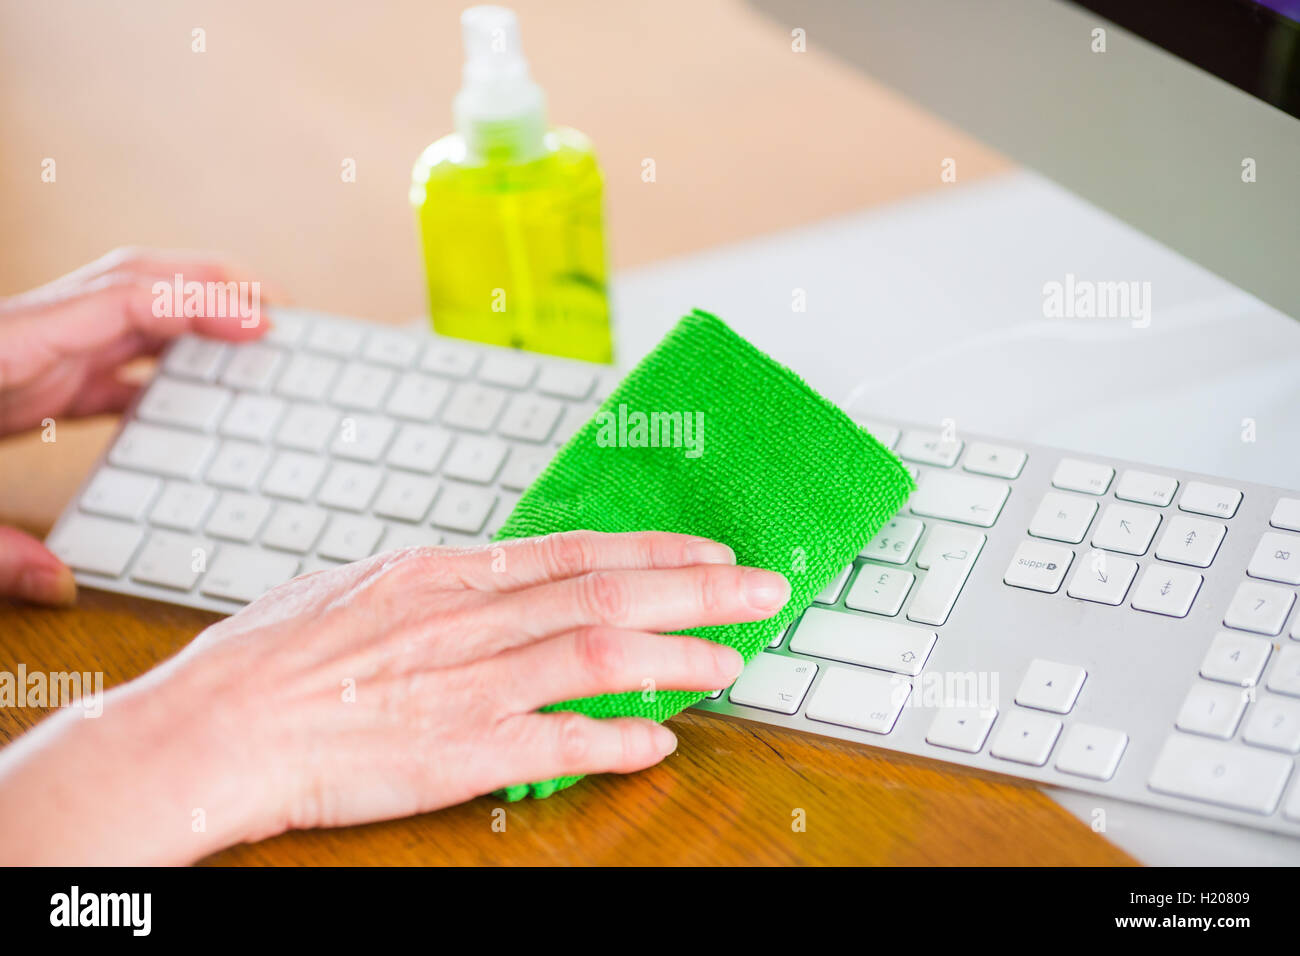 Woman cleaning her computer. Stock Photo